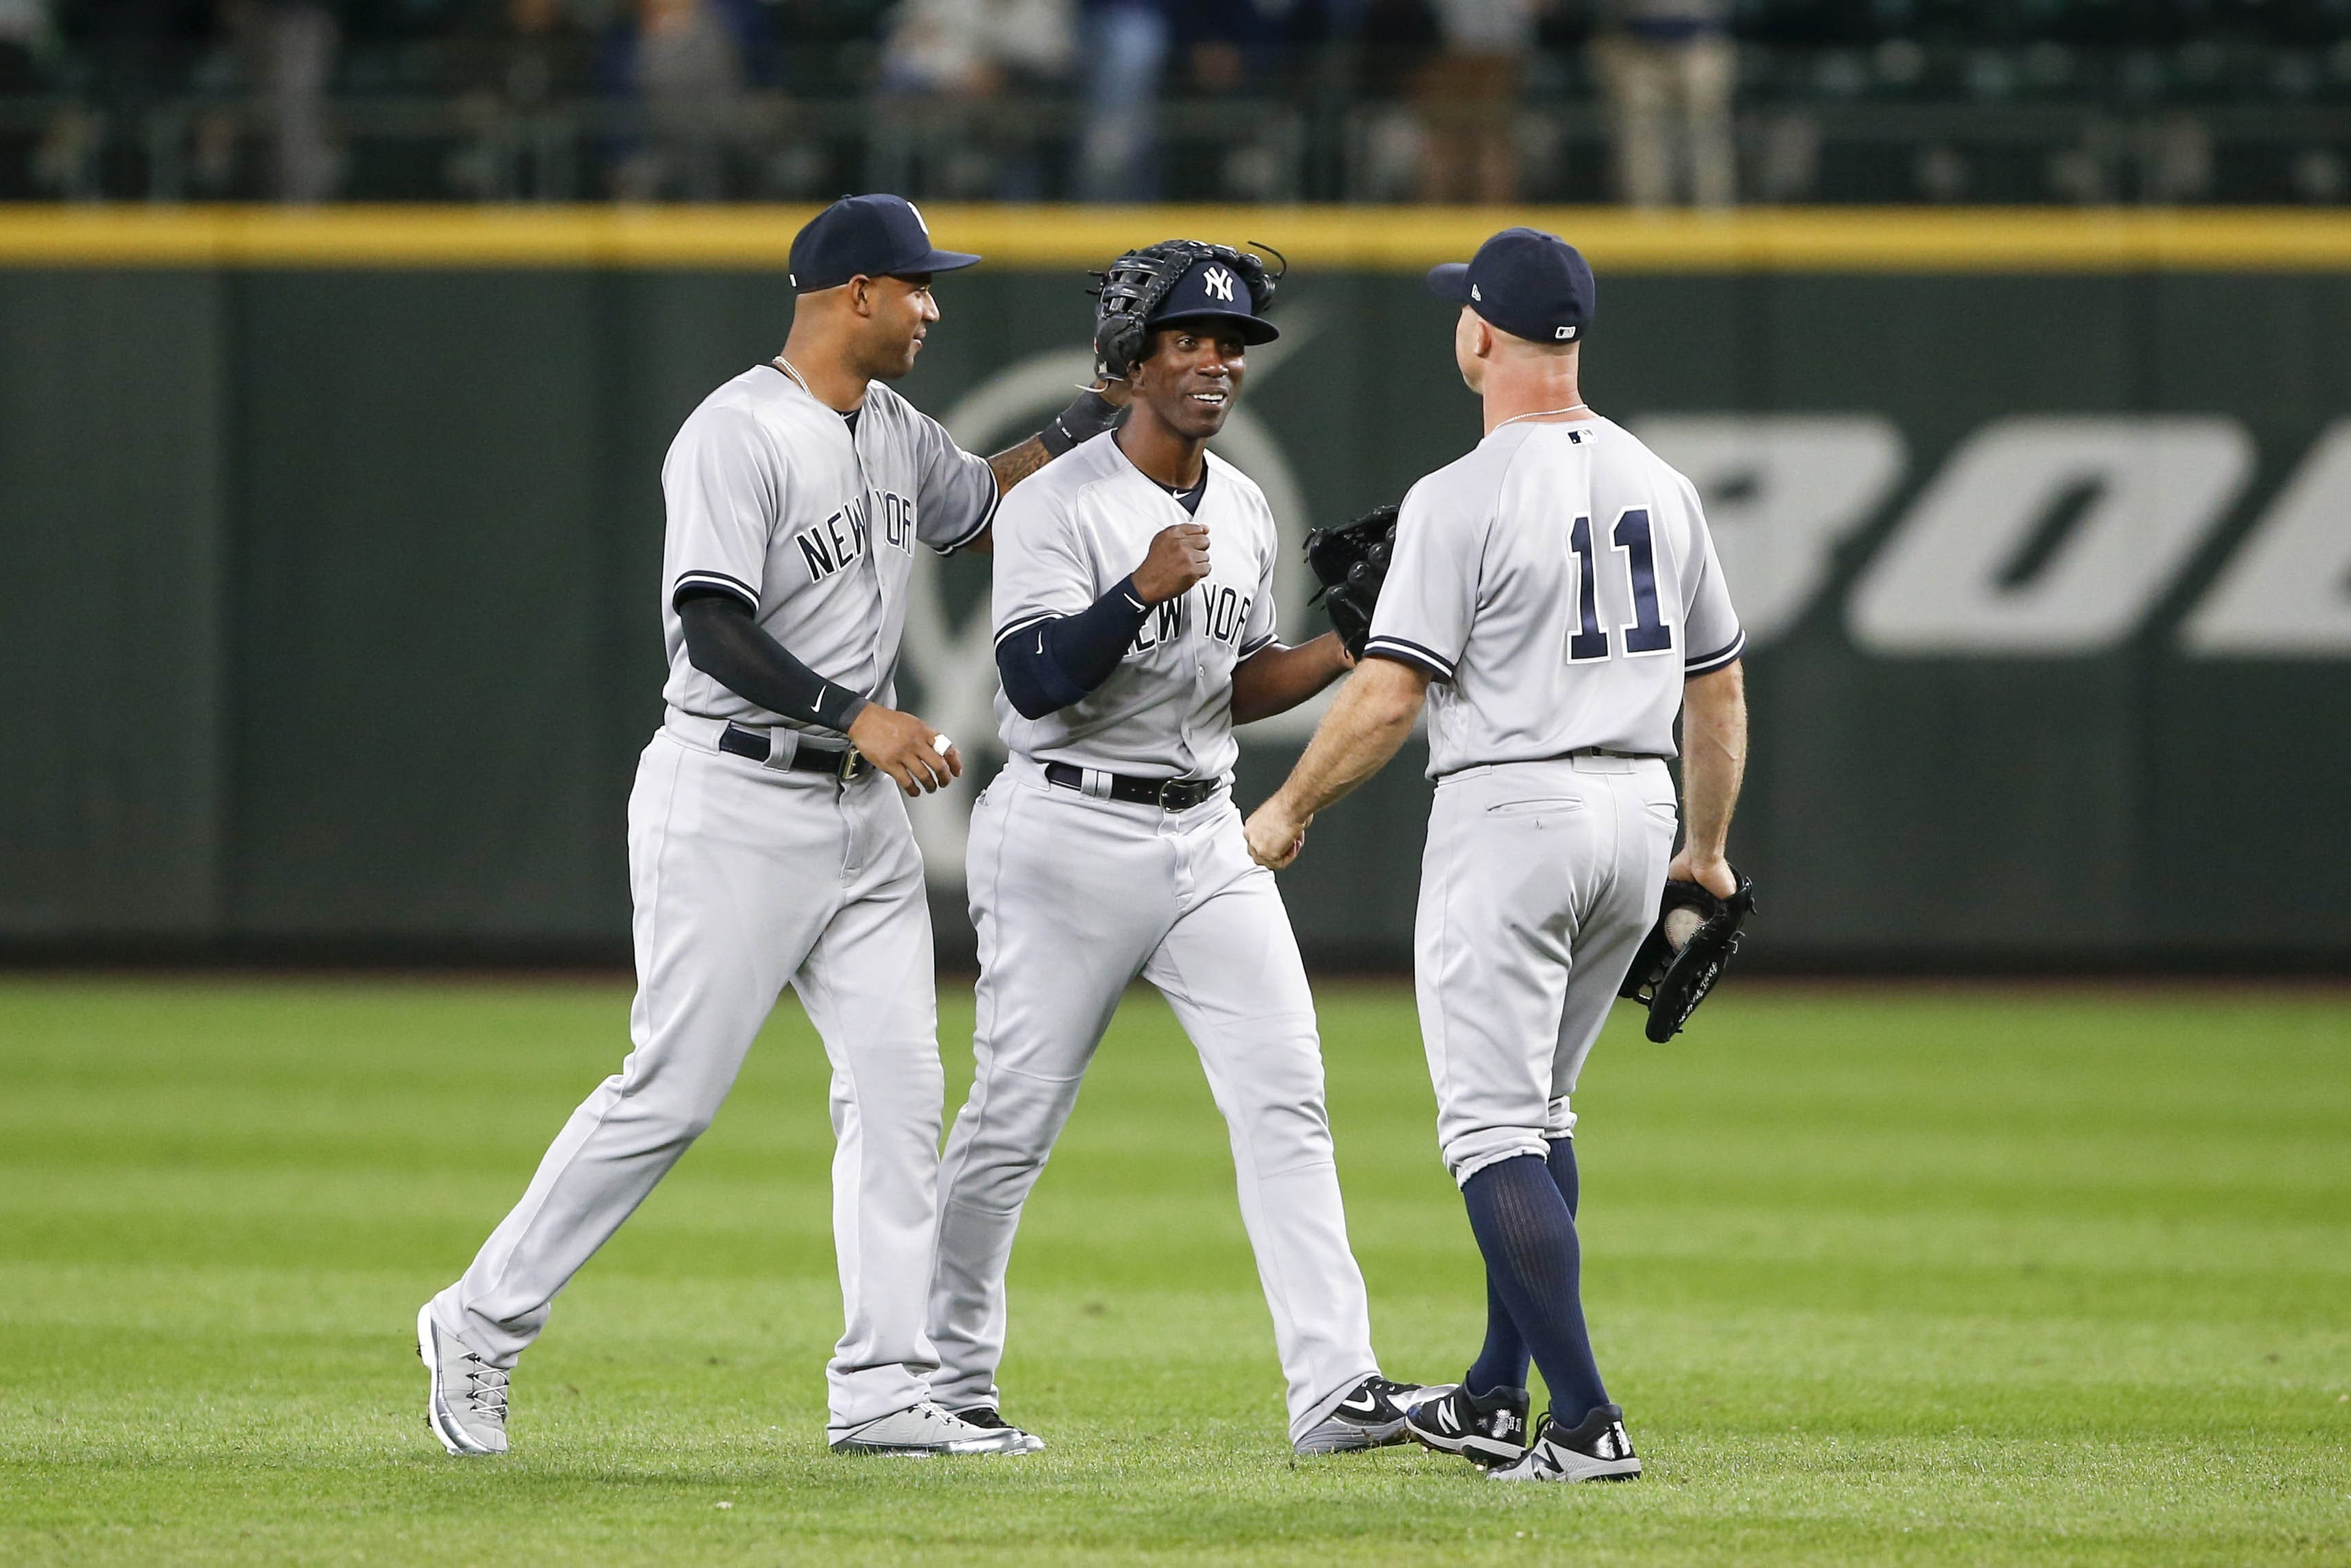 New York Yankees How Will The Outfield Shake Out Come March?